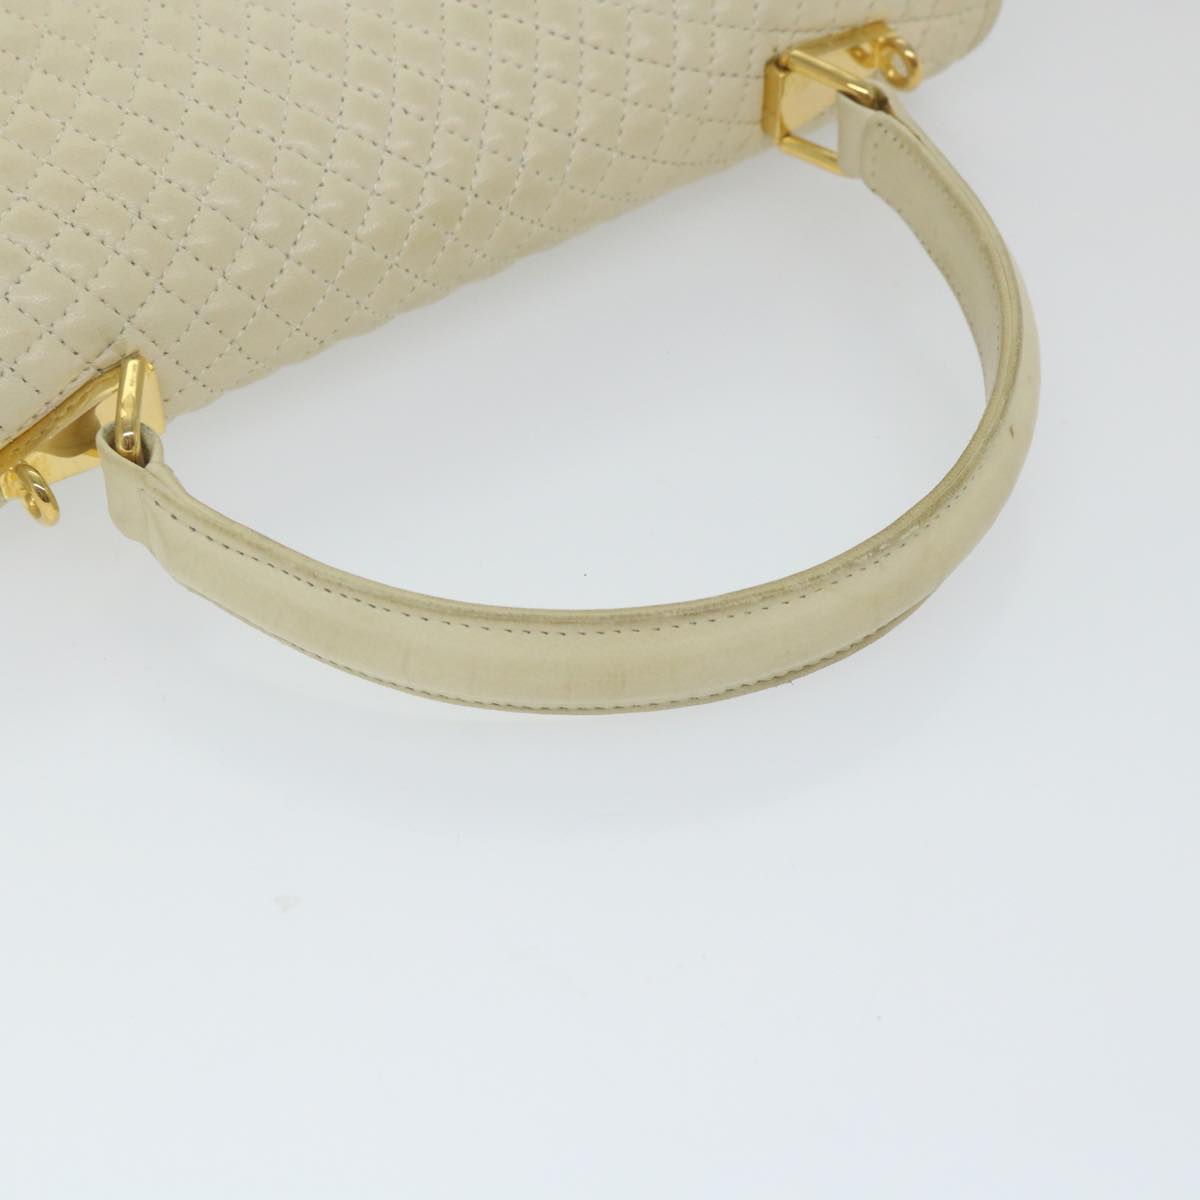 BALLY Quilted Hand Bag Leather Beige Auth bs9678